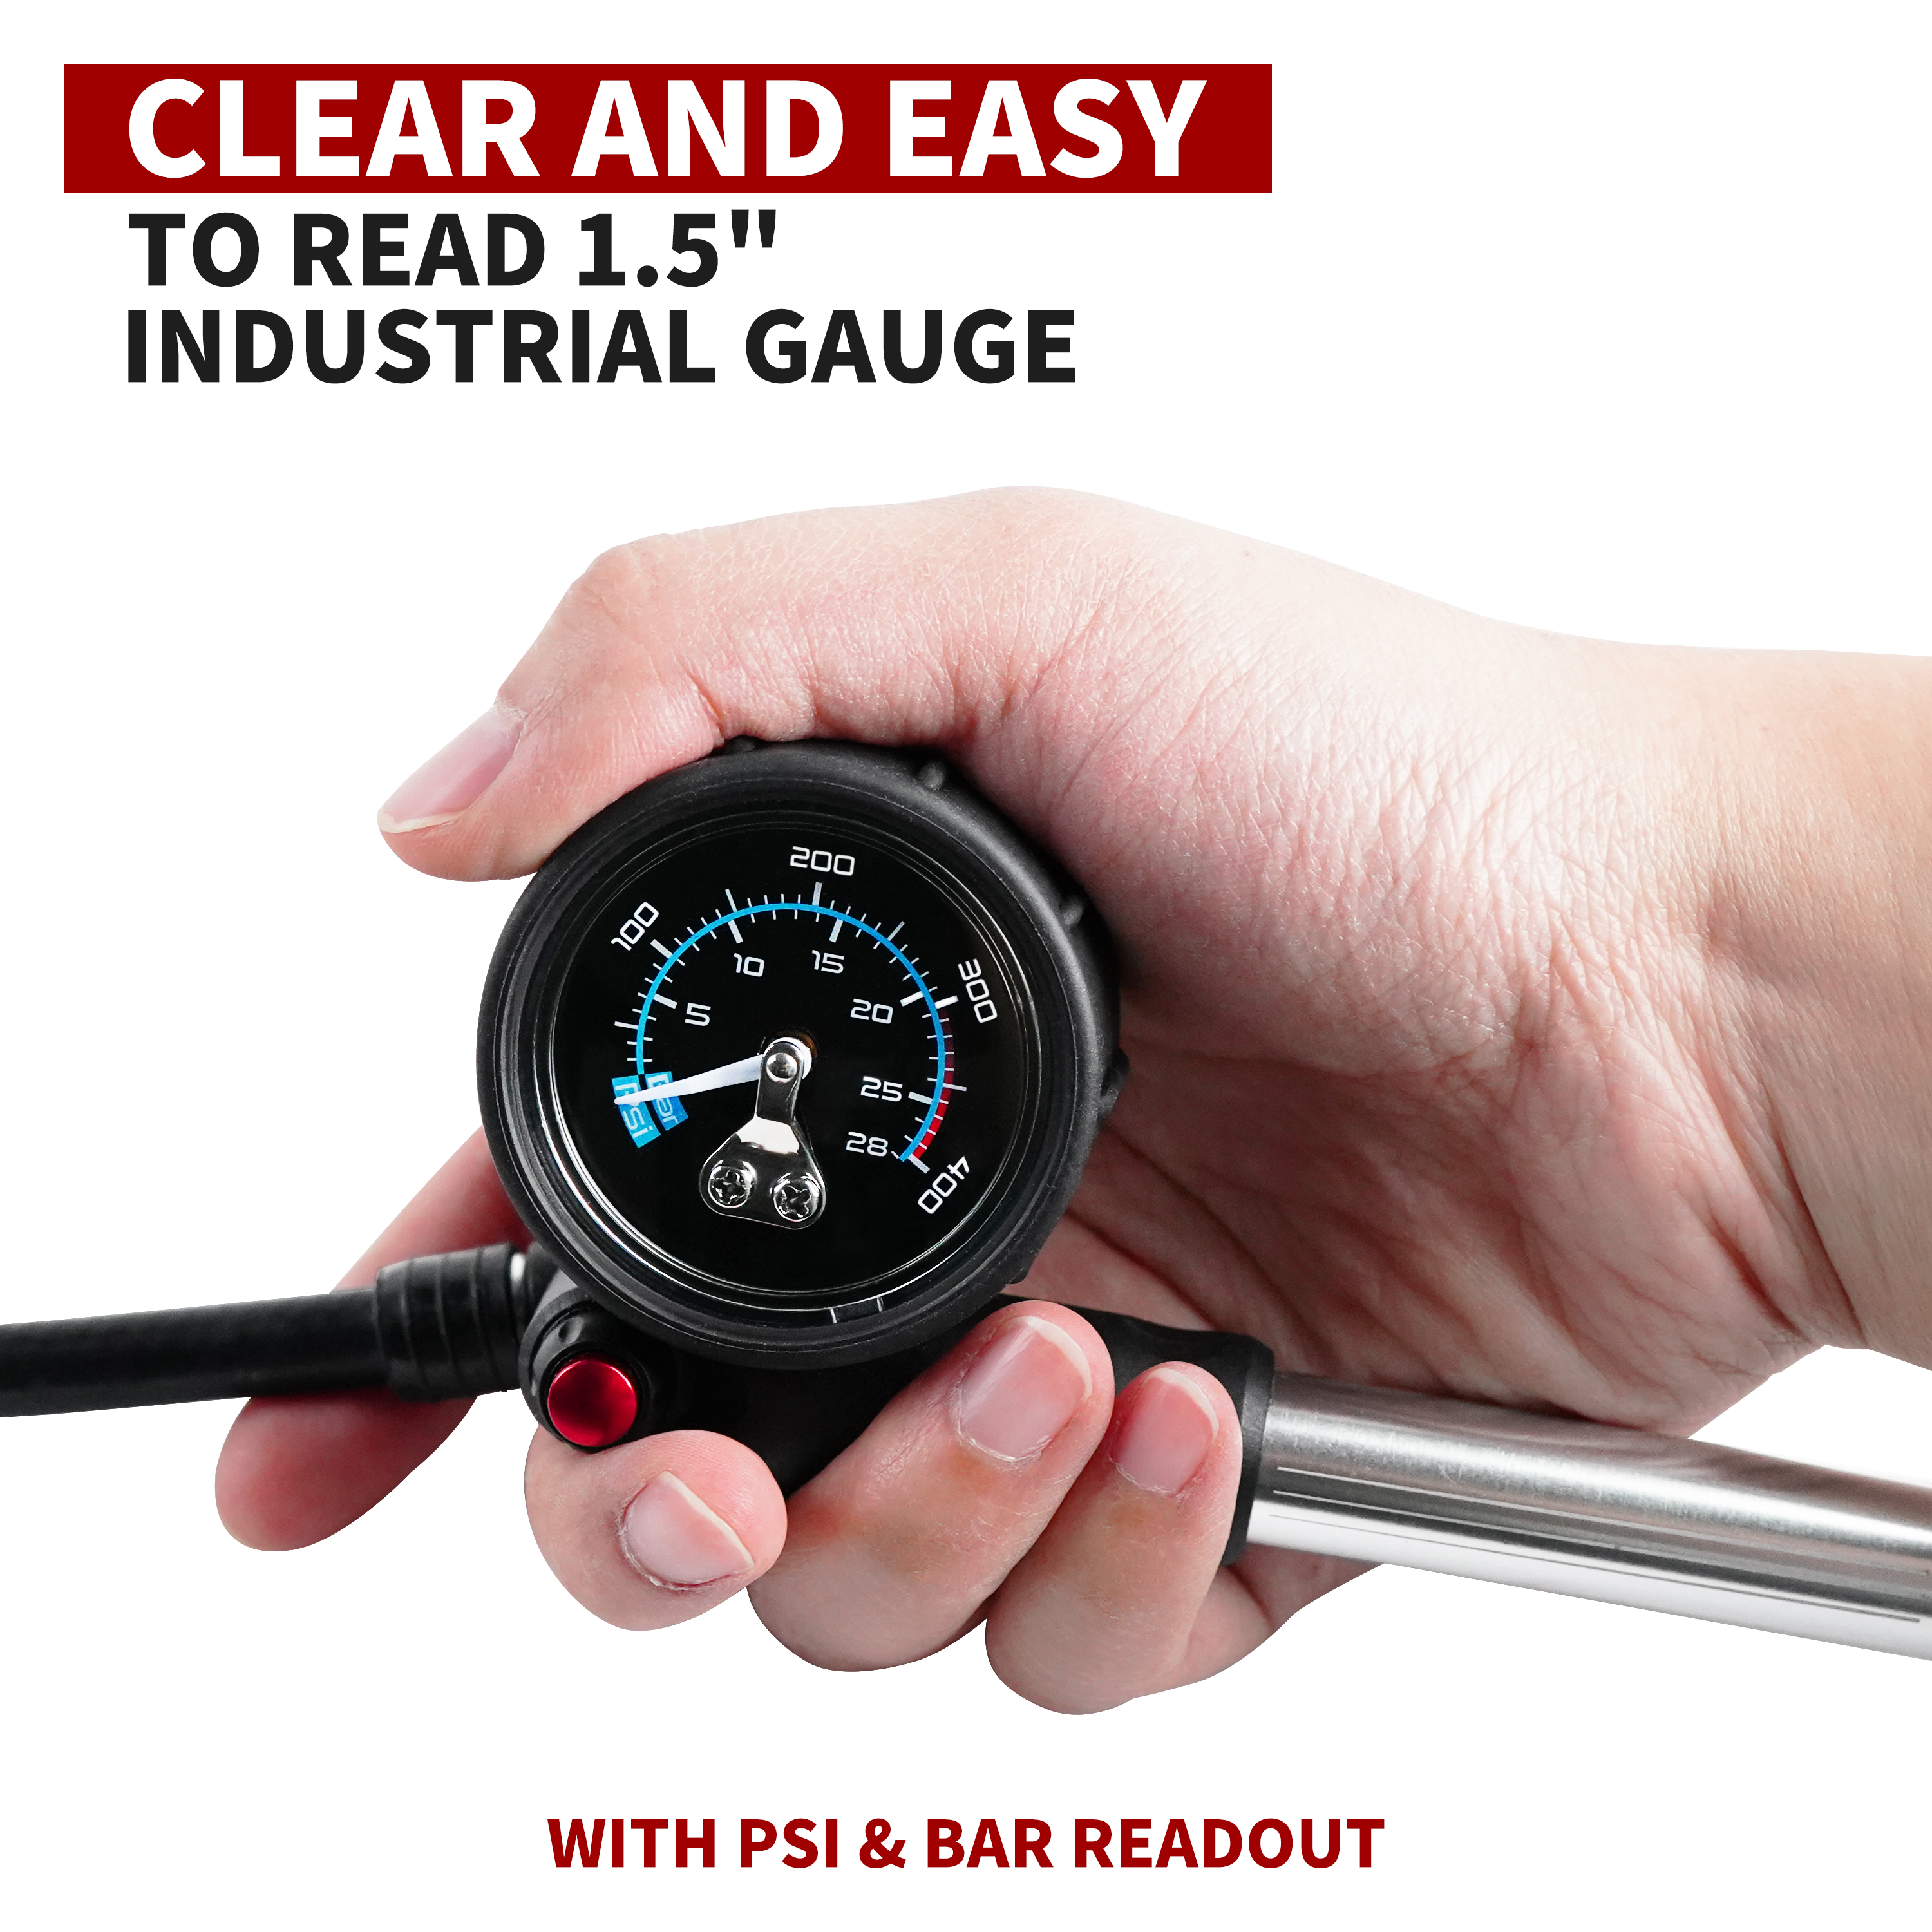 Clear and Easy to Read Gauge